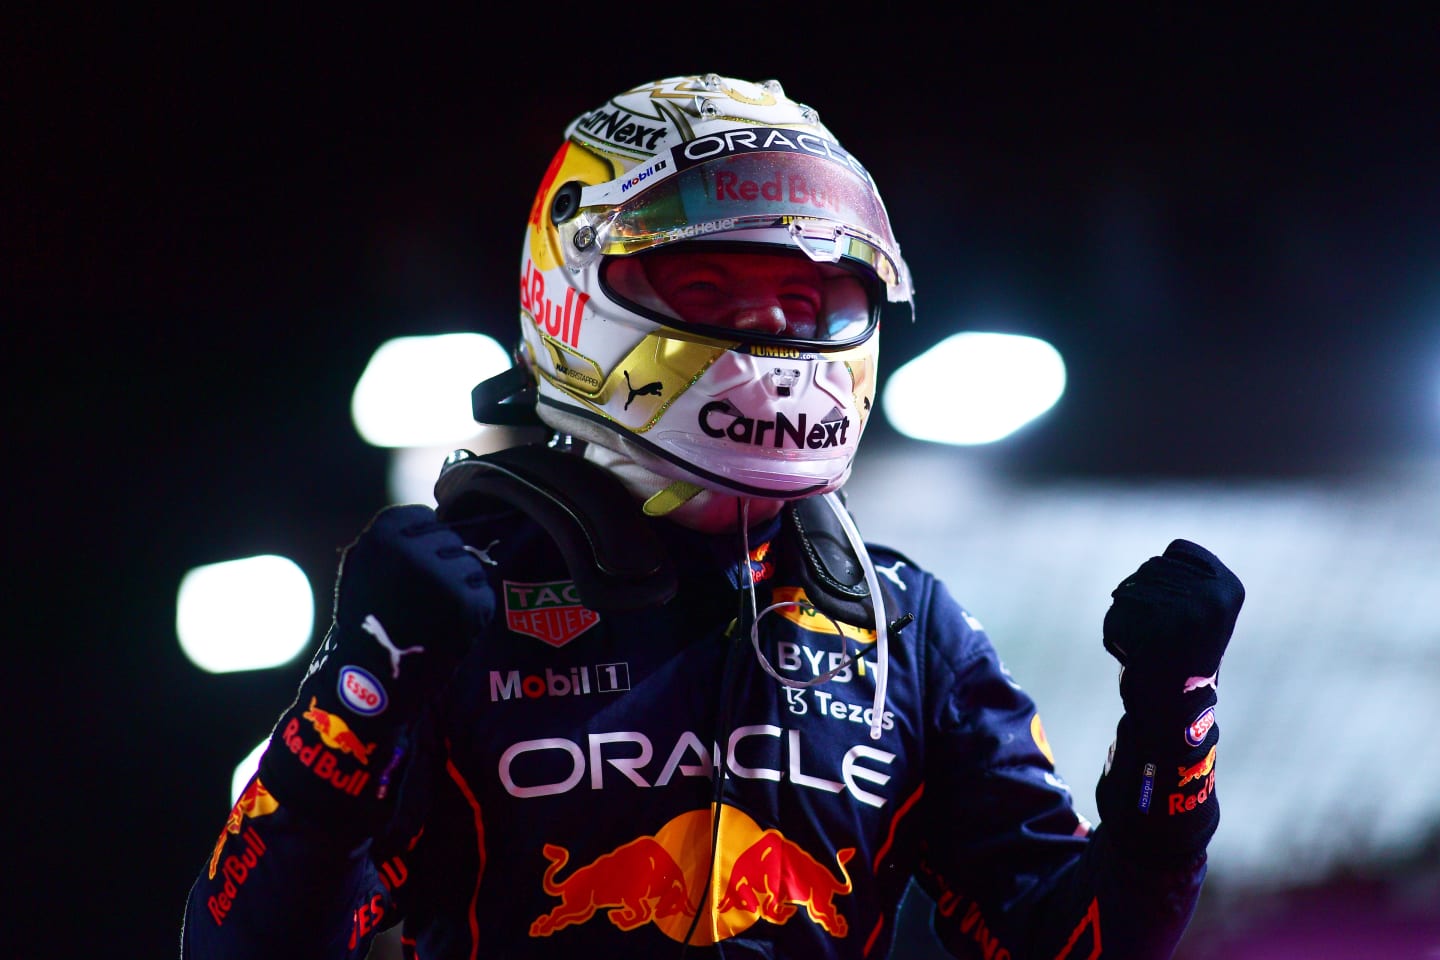 JEDDAH, SAUDI ARABIA - MARCH 27: Race winner Max Verstappen of the Netherlands and Oracle Red Bull Racing celebrates in parc ferme during the F1 Grand Prix of Saudi Arabia at the Jeddah Corniche Circuit on March 27, 2022 in Jeddah, Saudi Arabia. (Photo by Mario Renzi - Formula 1/Formula 1 via Getty Images)